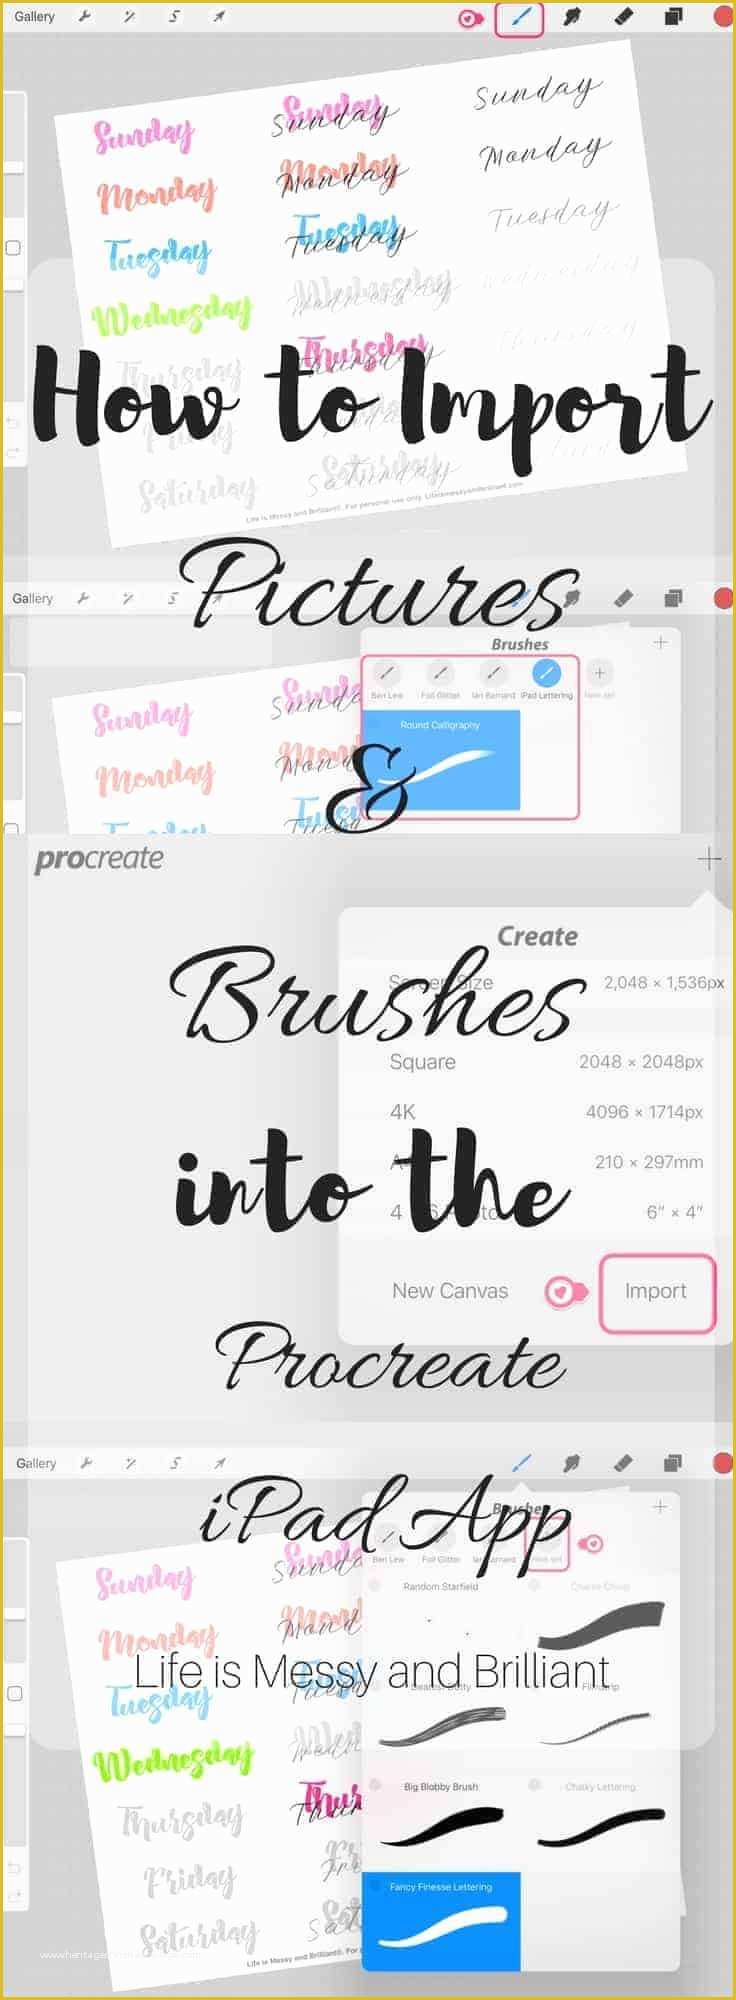 Free Procreate Templates Of How to Import and Brushes Into Procreate Ipad App